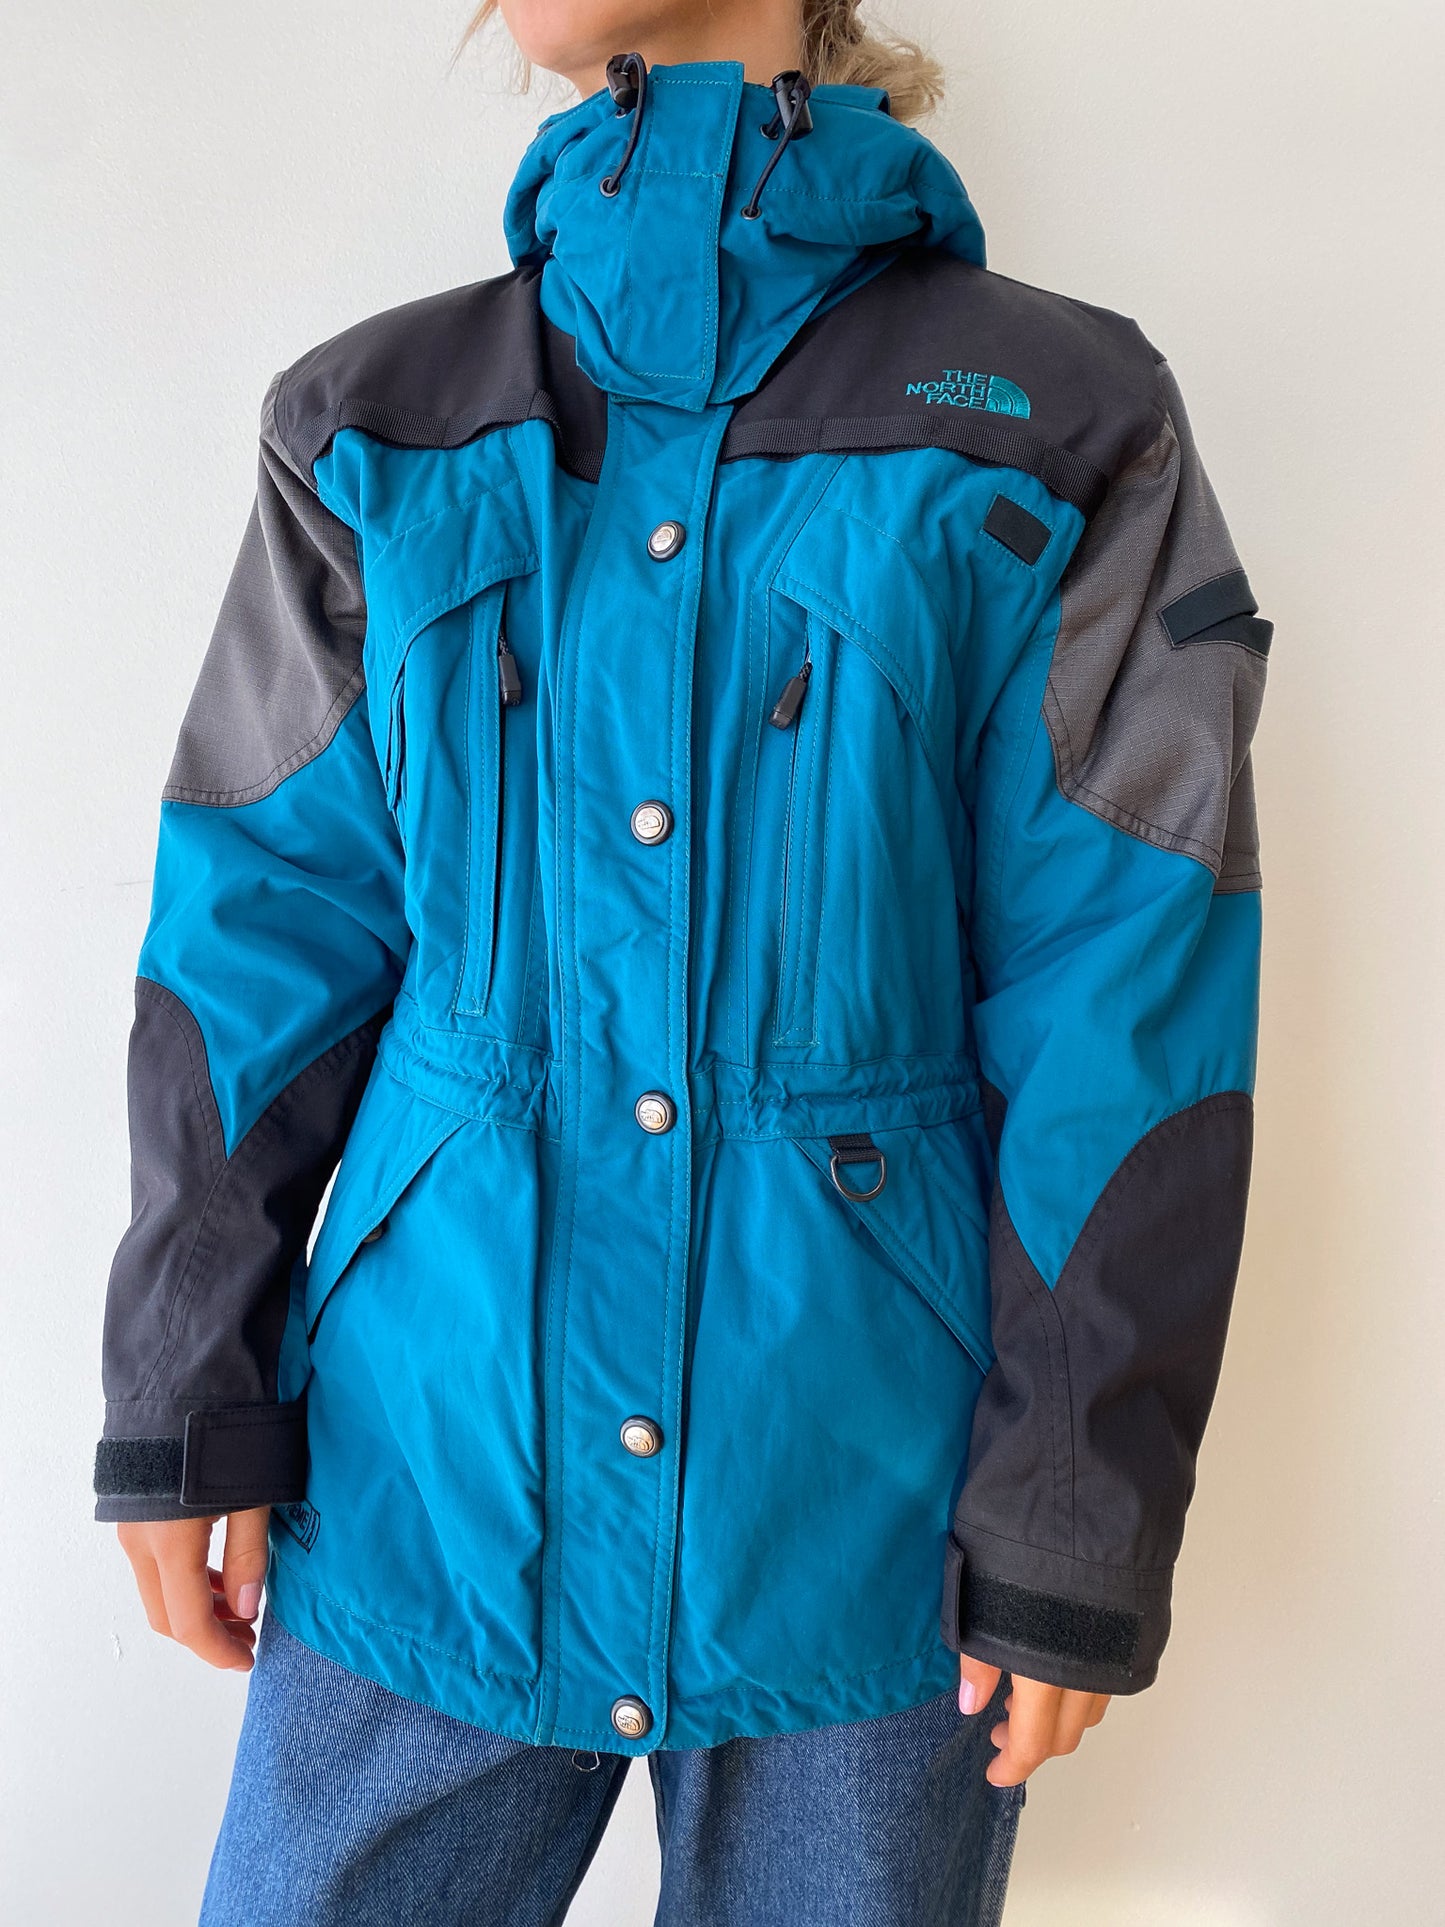 90’s The North Face Extreme Gear Jacket—[S/M]